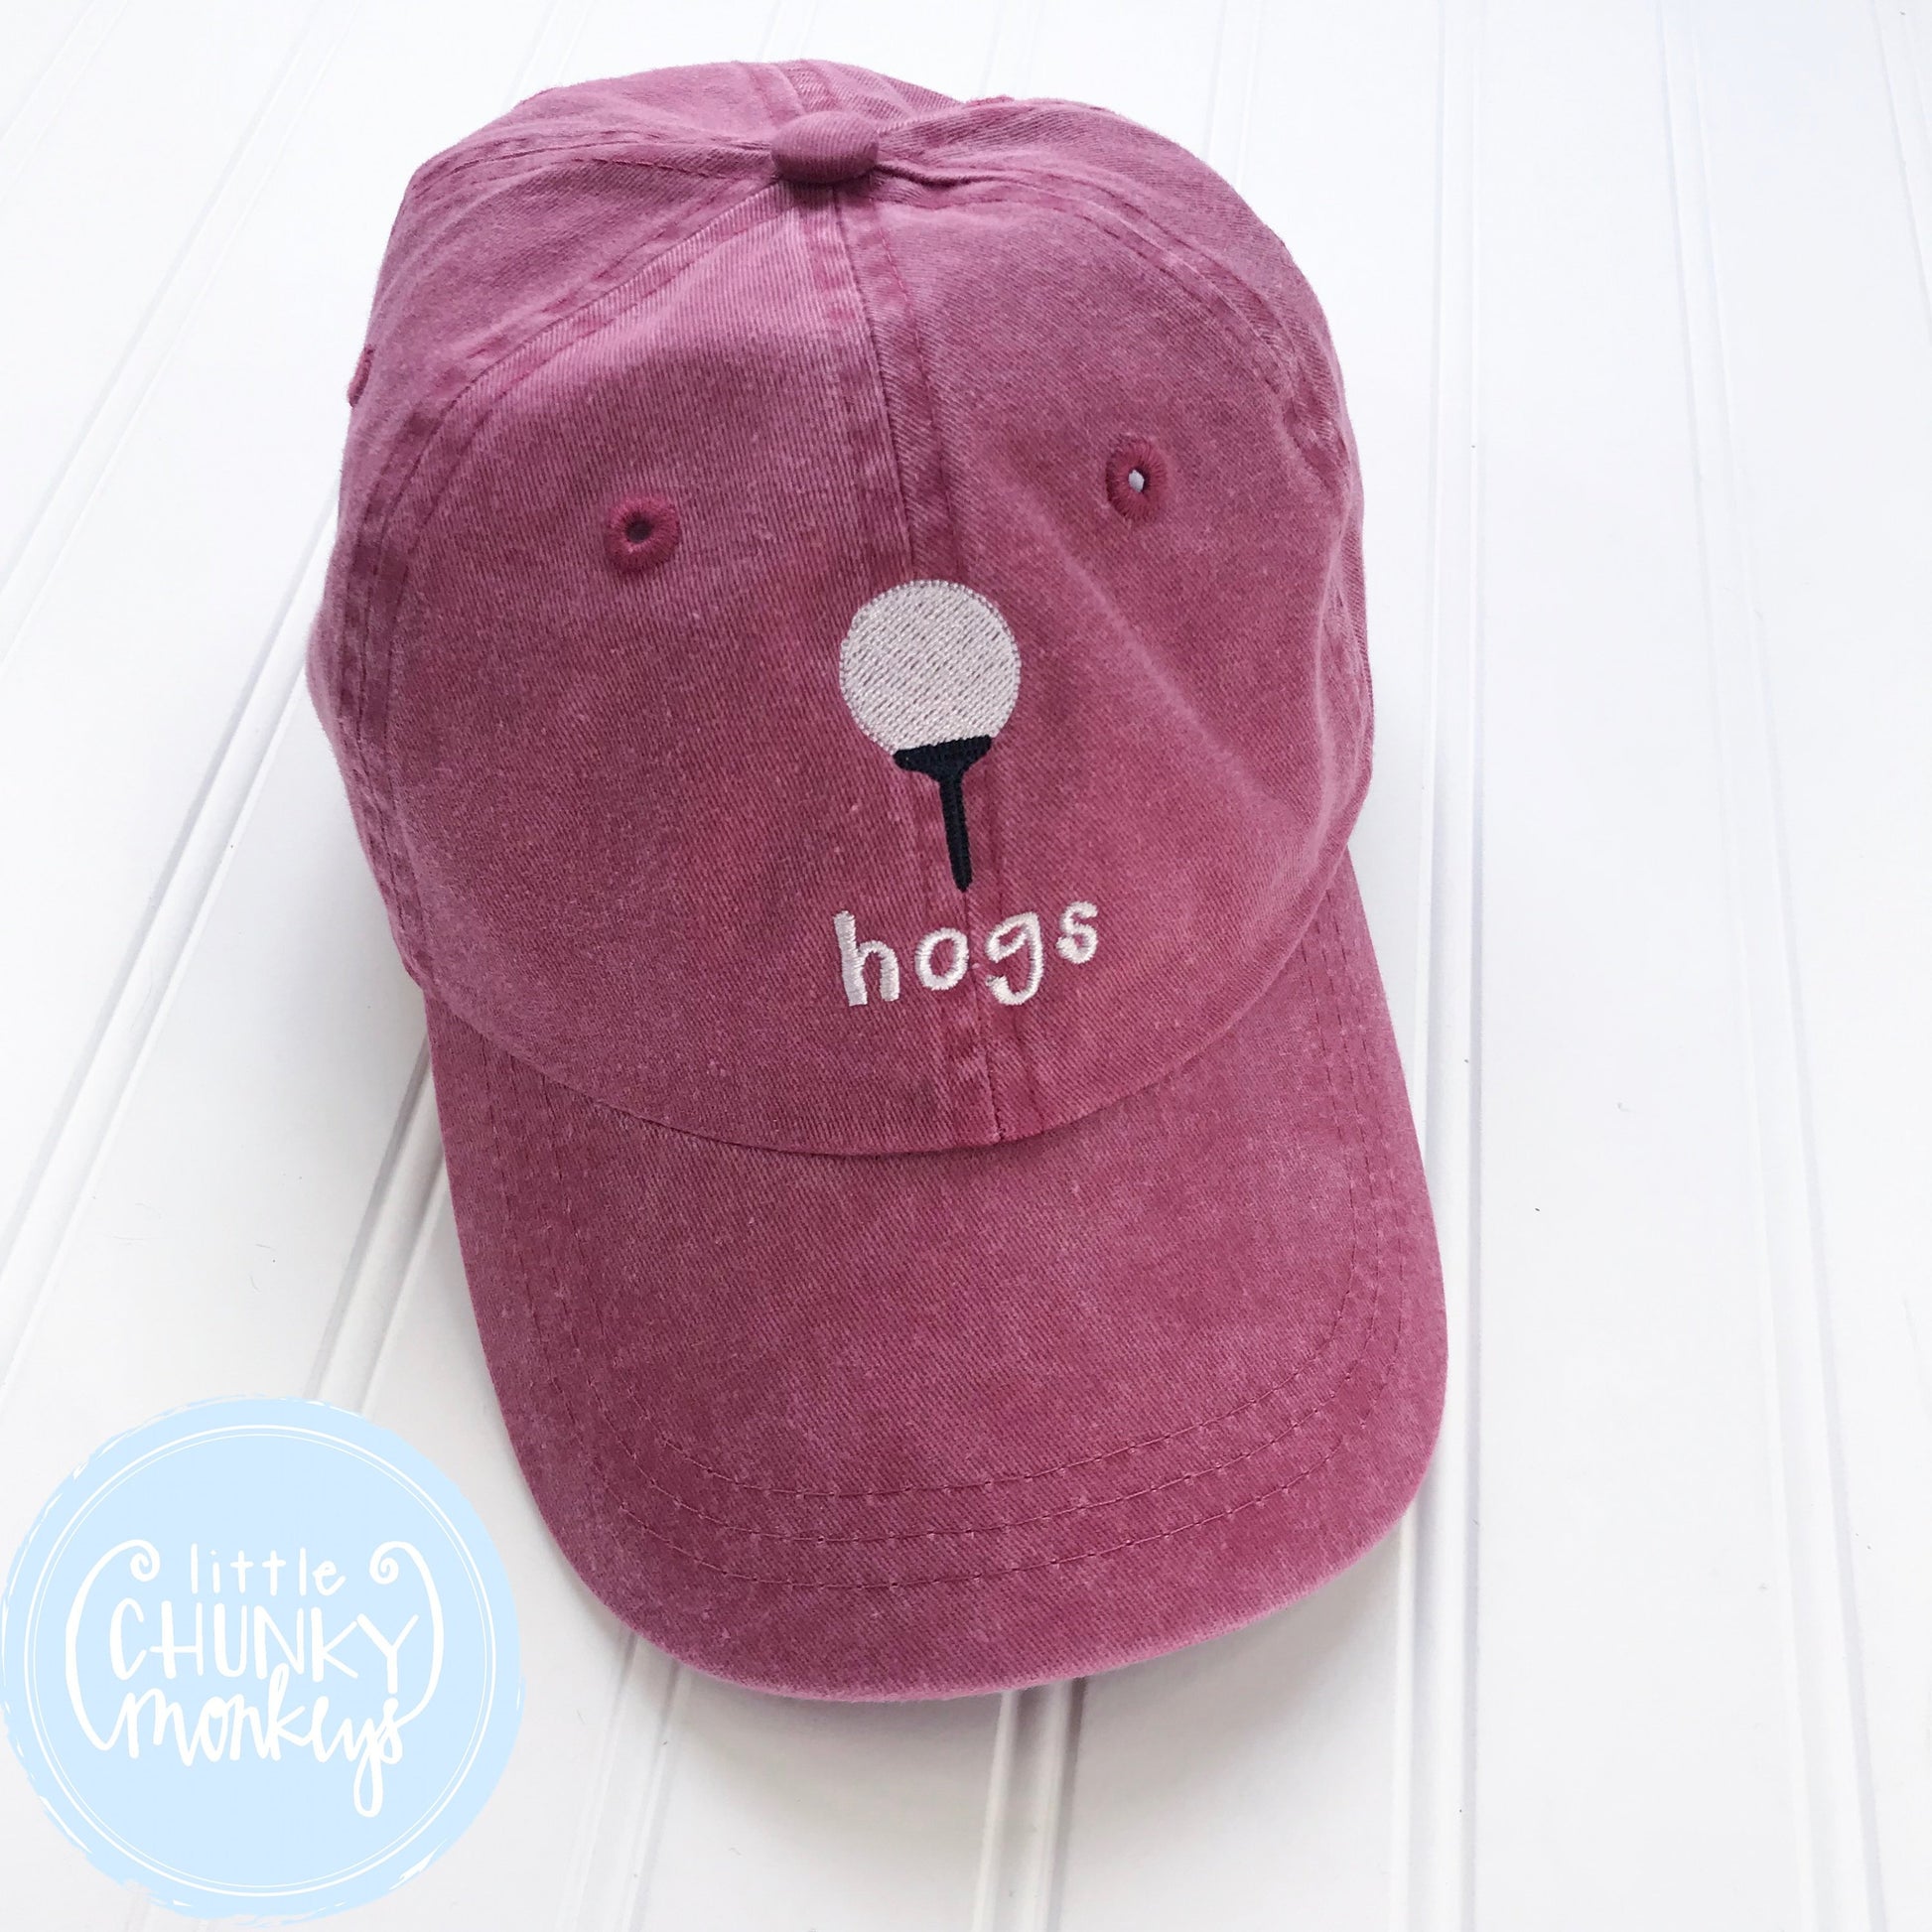 Toddler Kid Hat - Faded Red with Golf Ball and Monogram